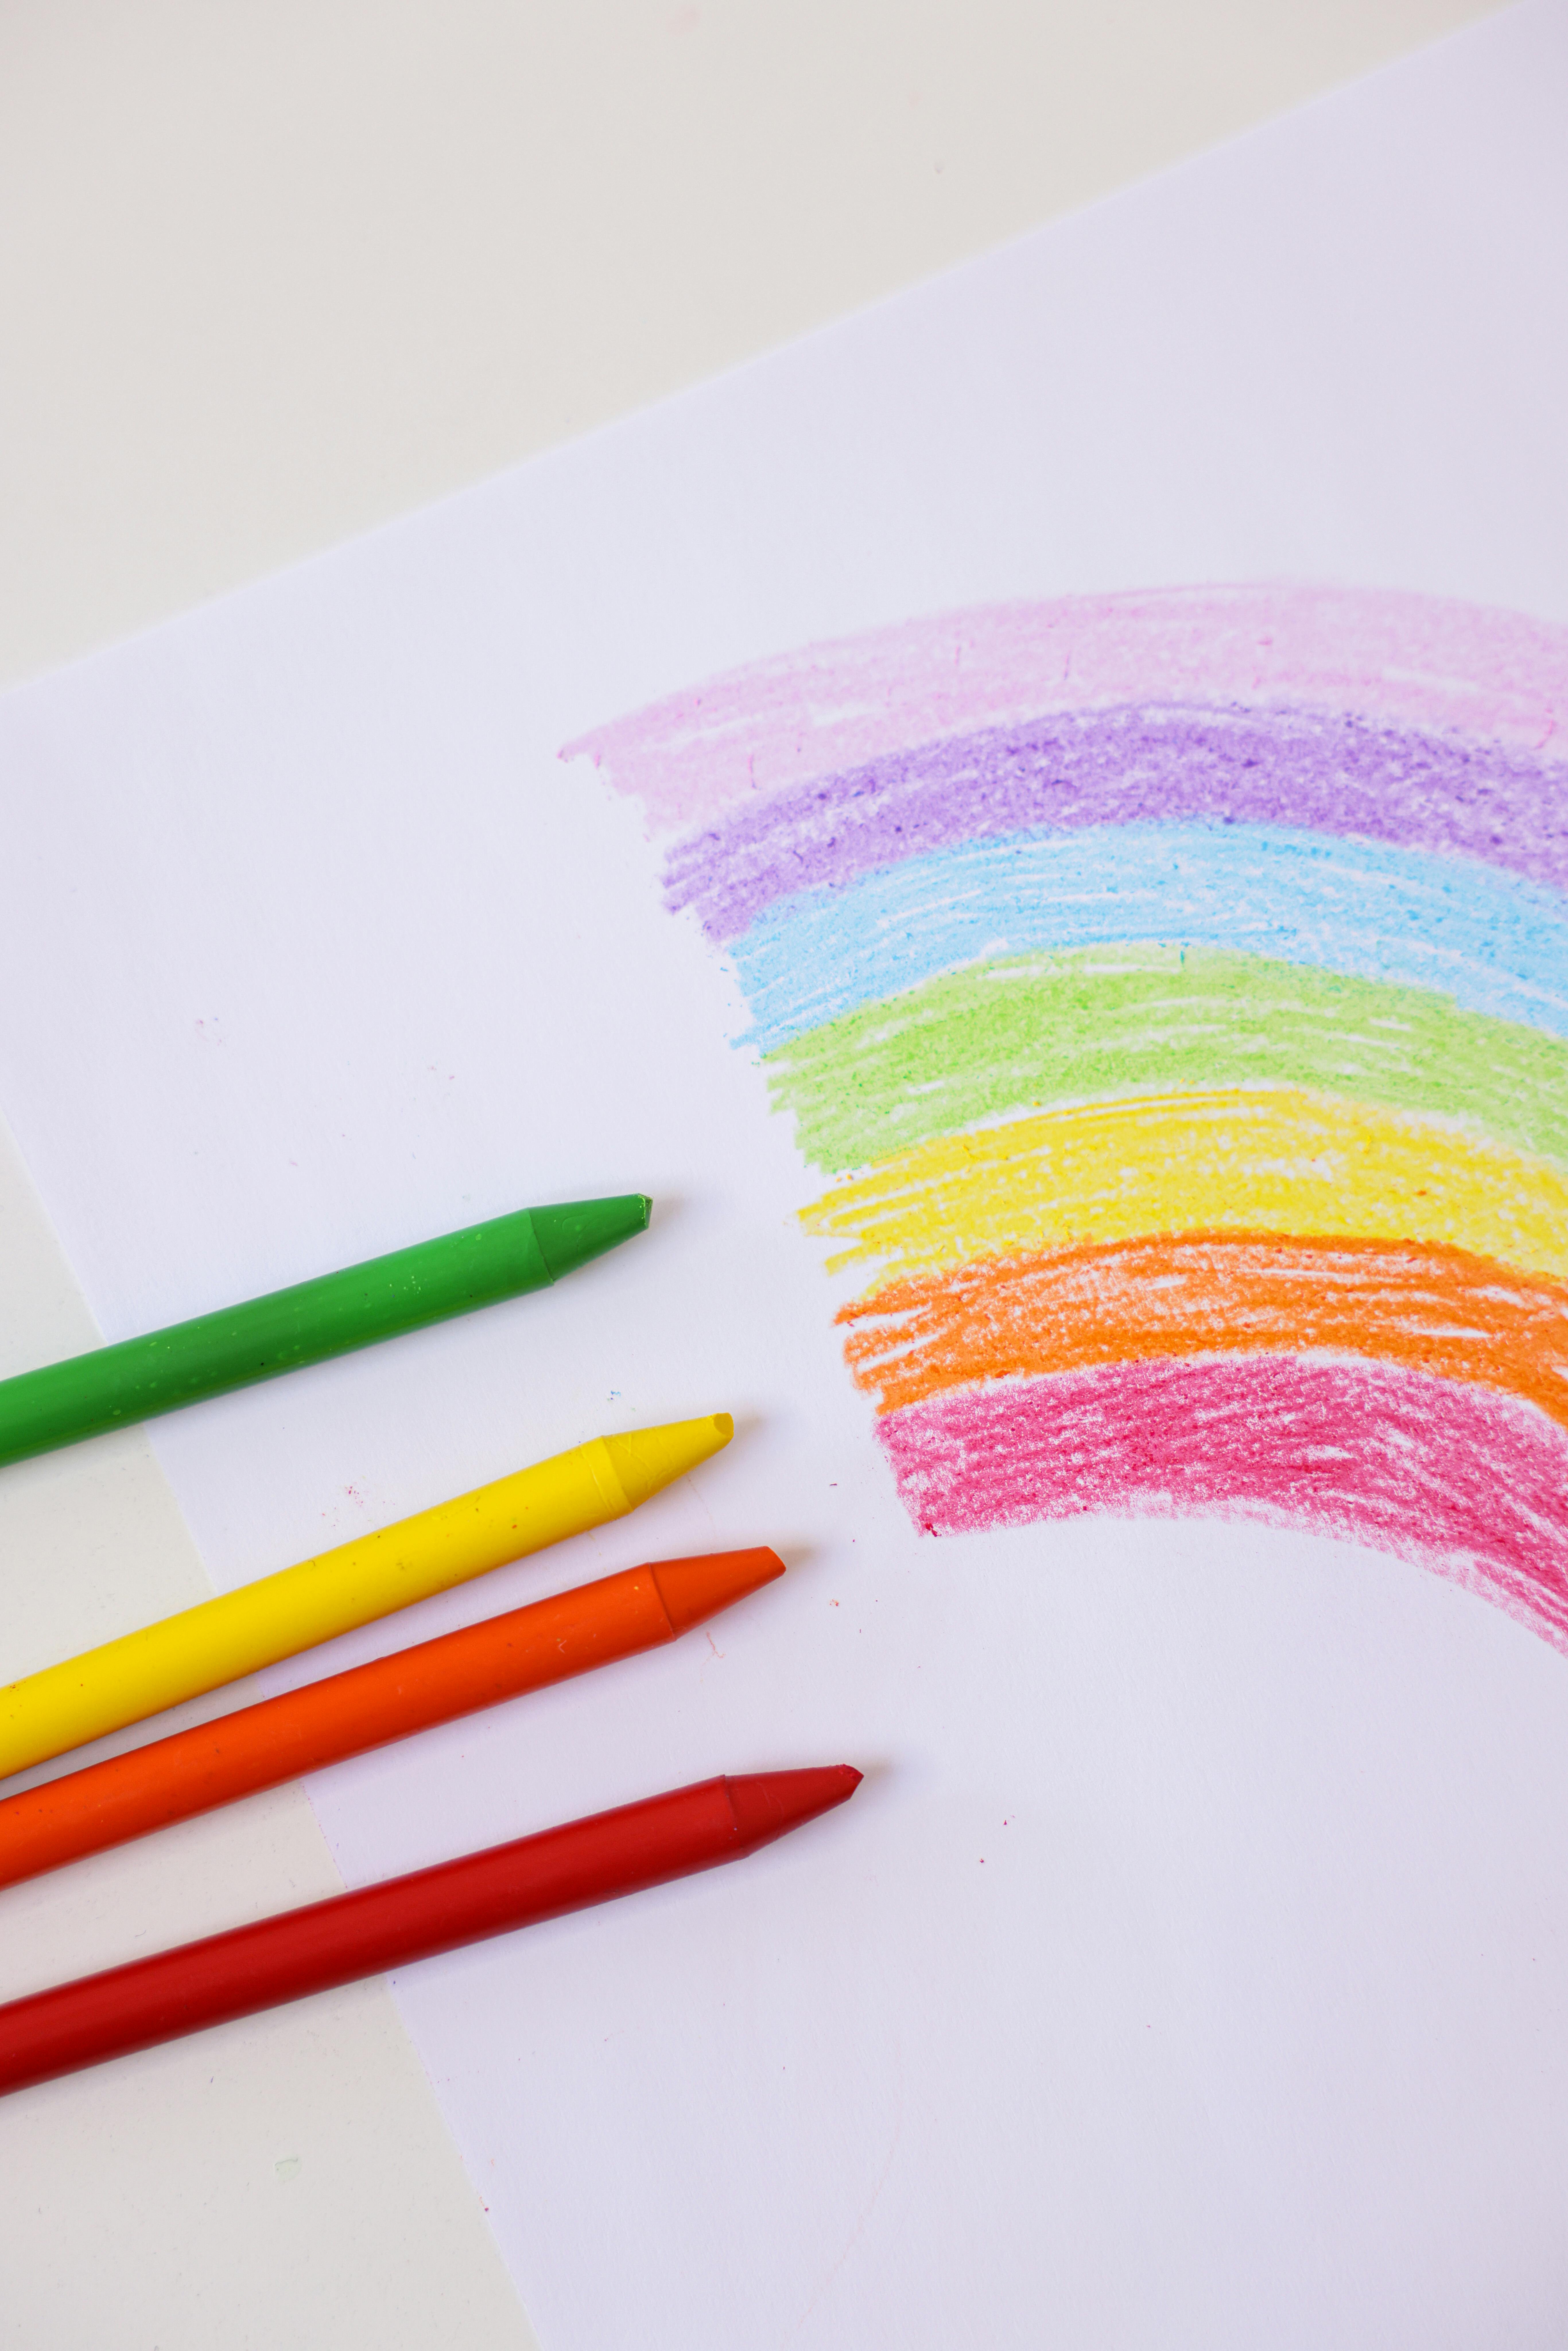 Rainbowcolored Pencil Crayons Sketch Flowers On White Paper Stock Photo -  Download Image Now - iStock